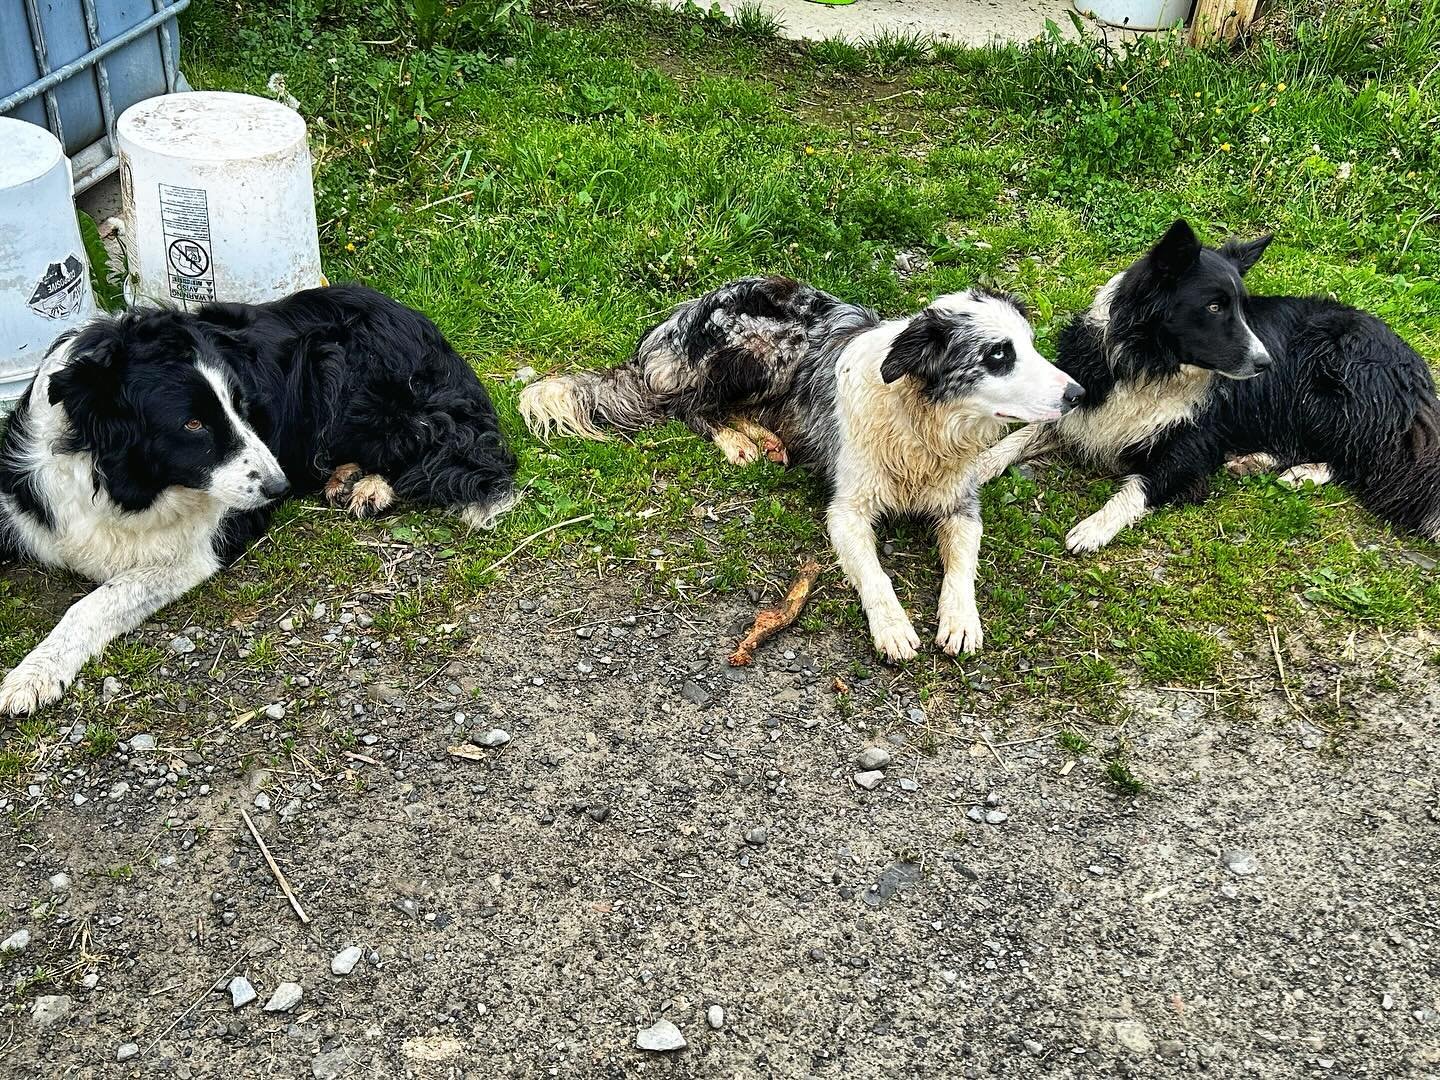 ❤️Ebb, Merle, and Jewel. ❤️ Tres amigos that take the role of &ldquo;Farm Dog&rdquo; pretty seriously. 

They are out the door before the sun rises, greet every person that comes to the farm, sneak a little taste test of calf milk at-least once a day